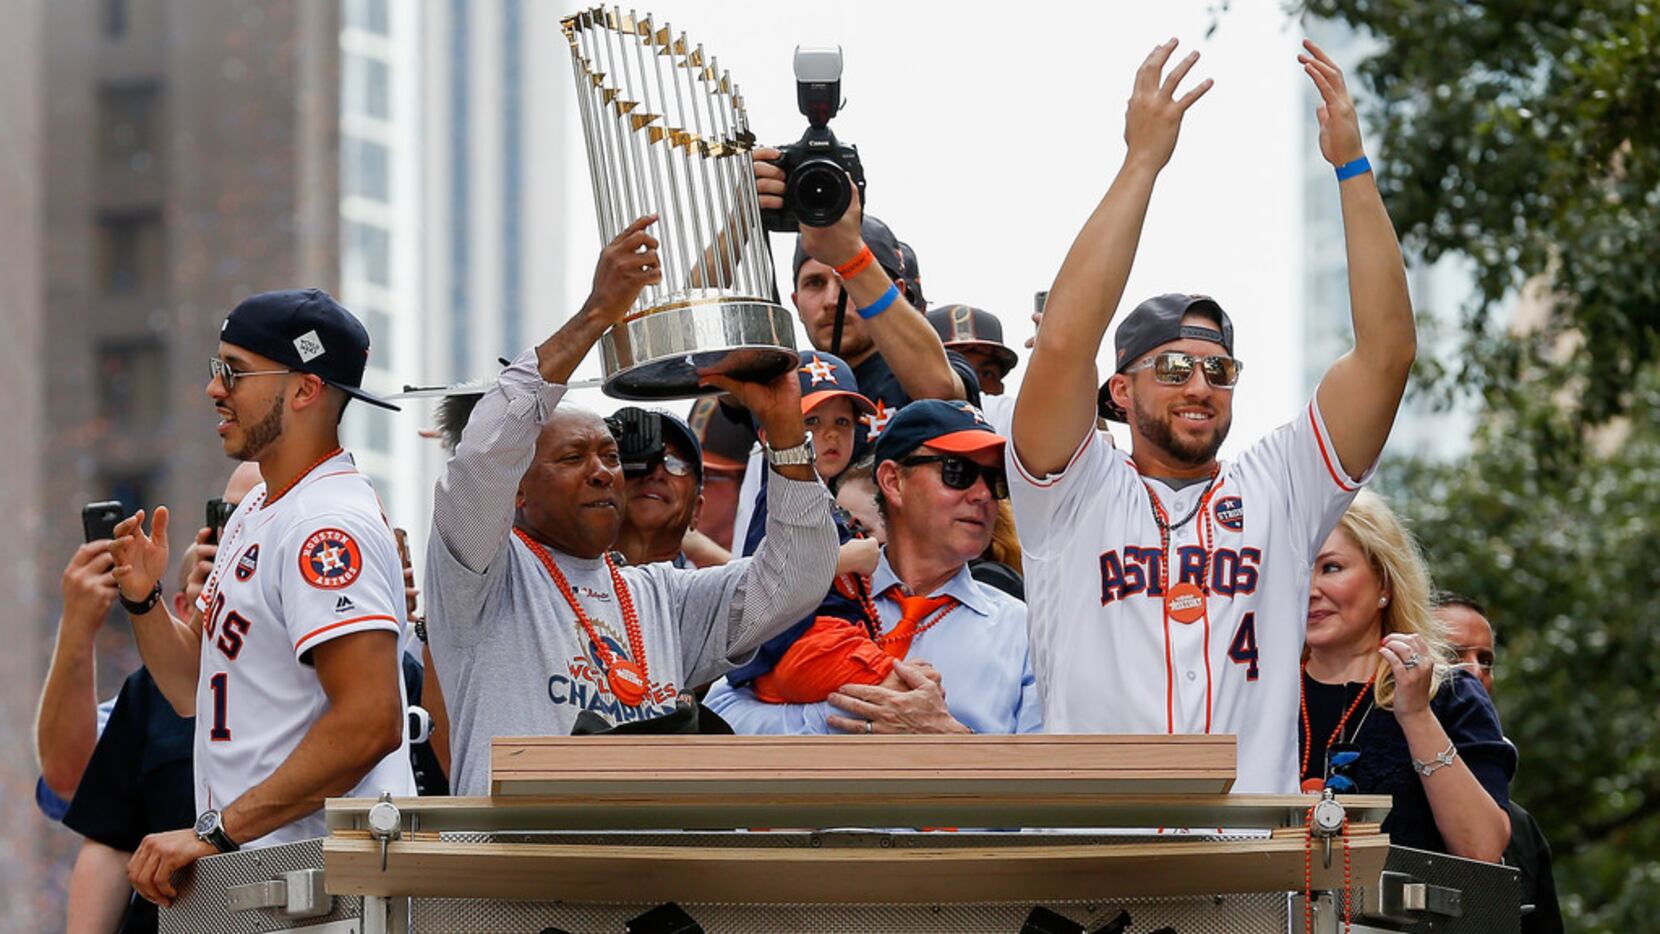 LOOK: Here's what the Astros' World Series championship shirts and